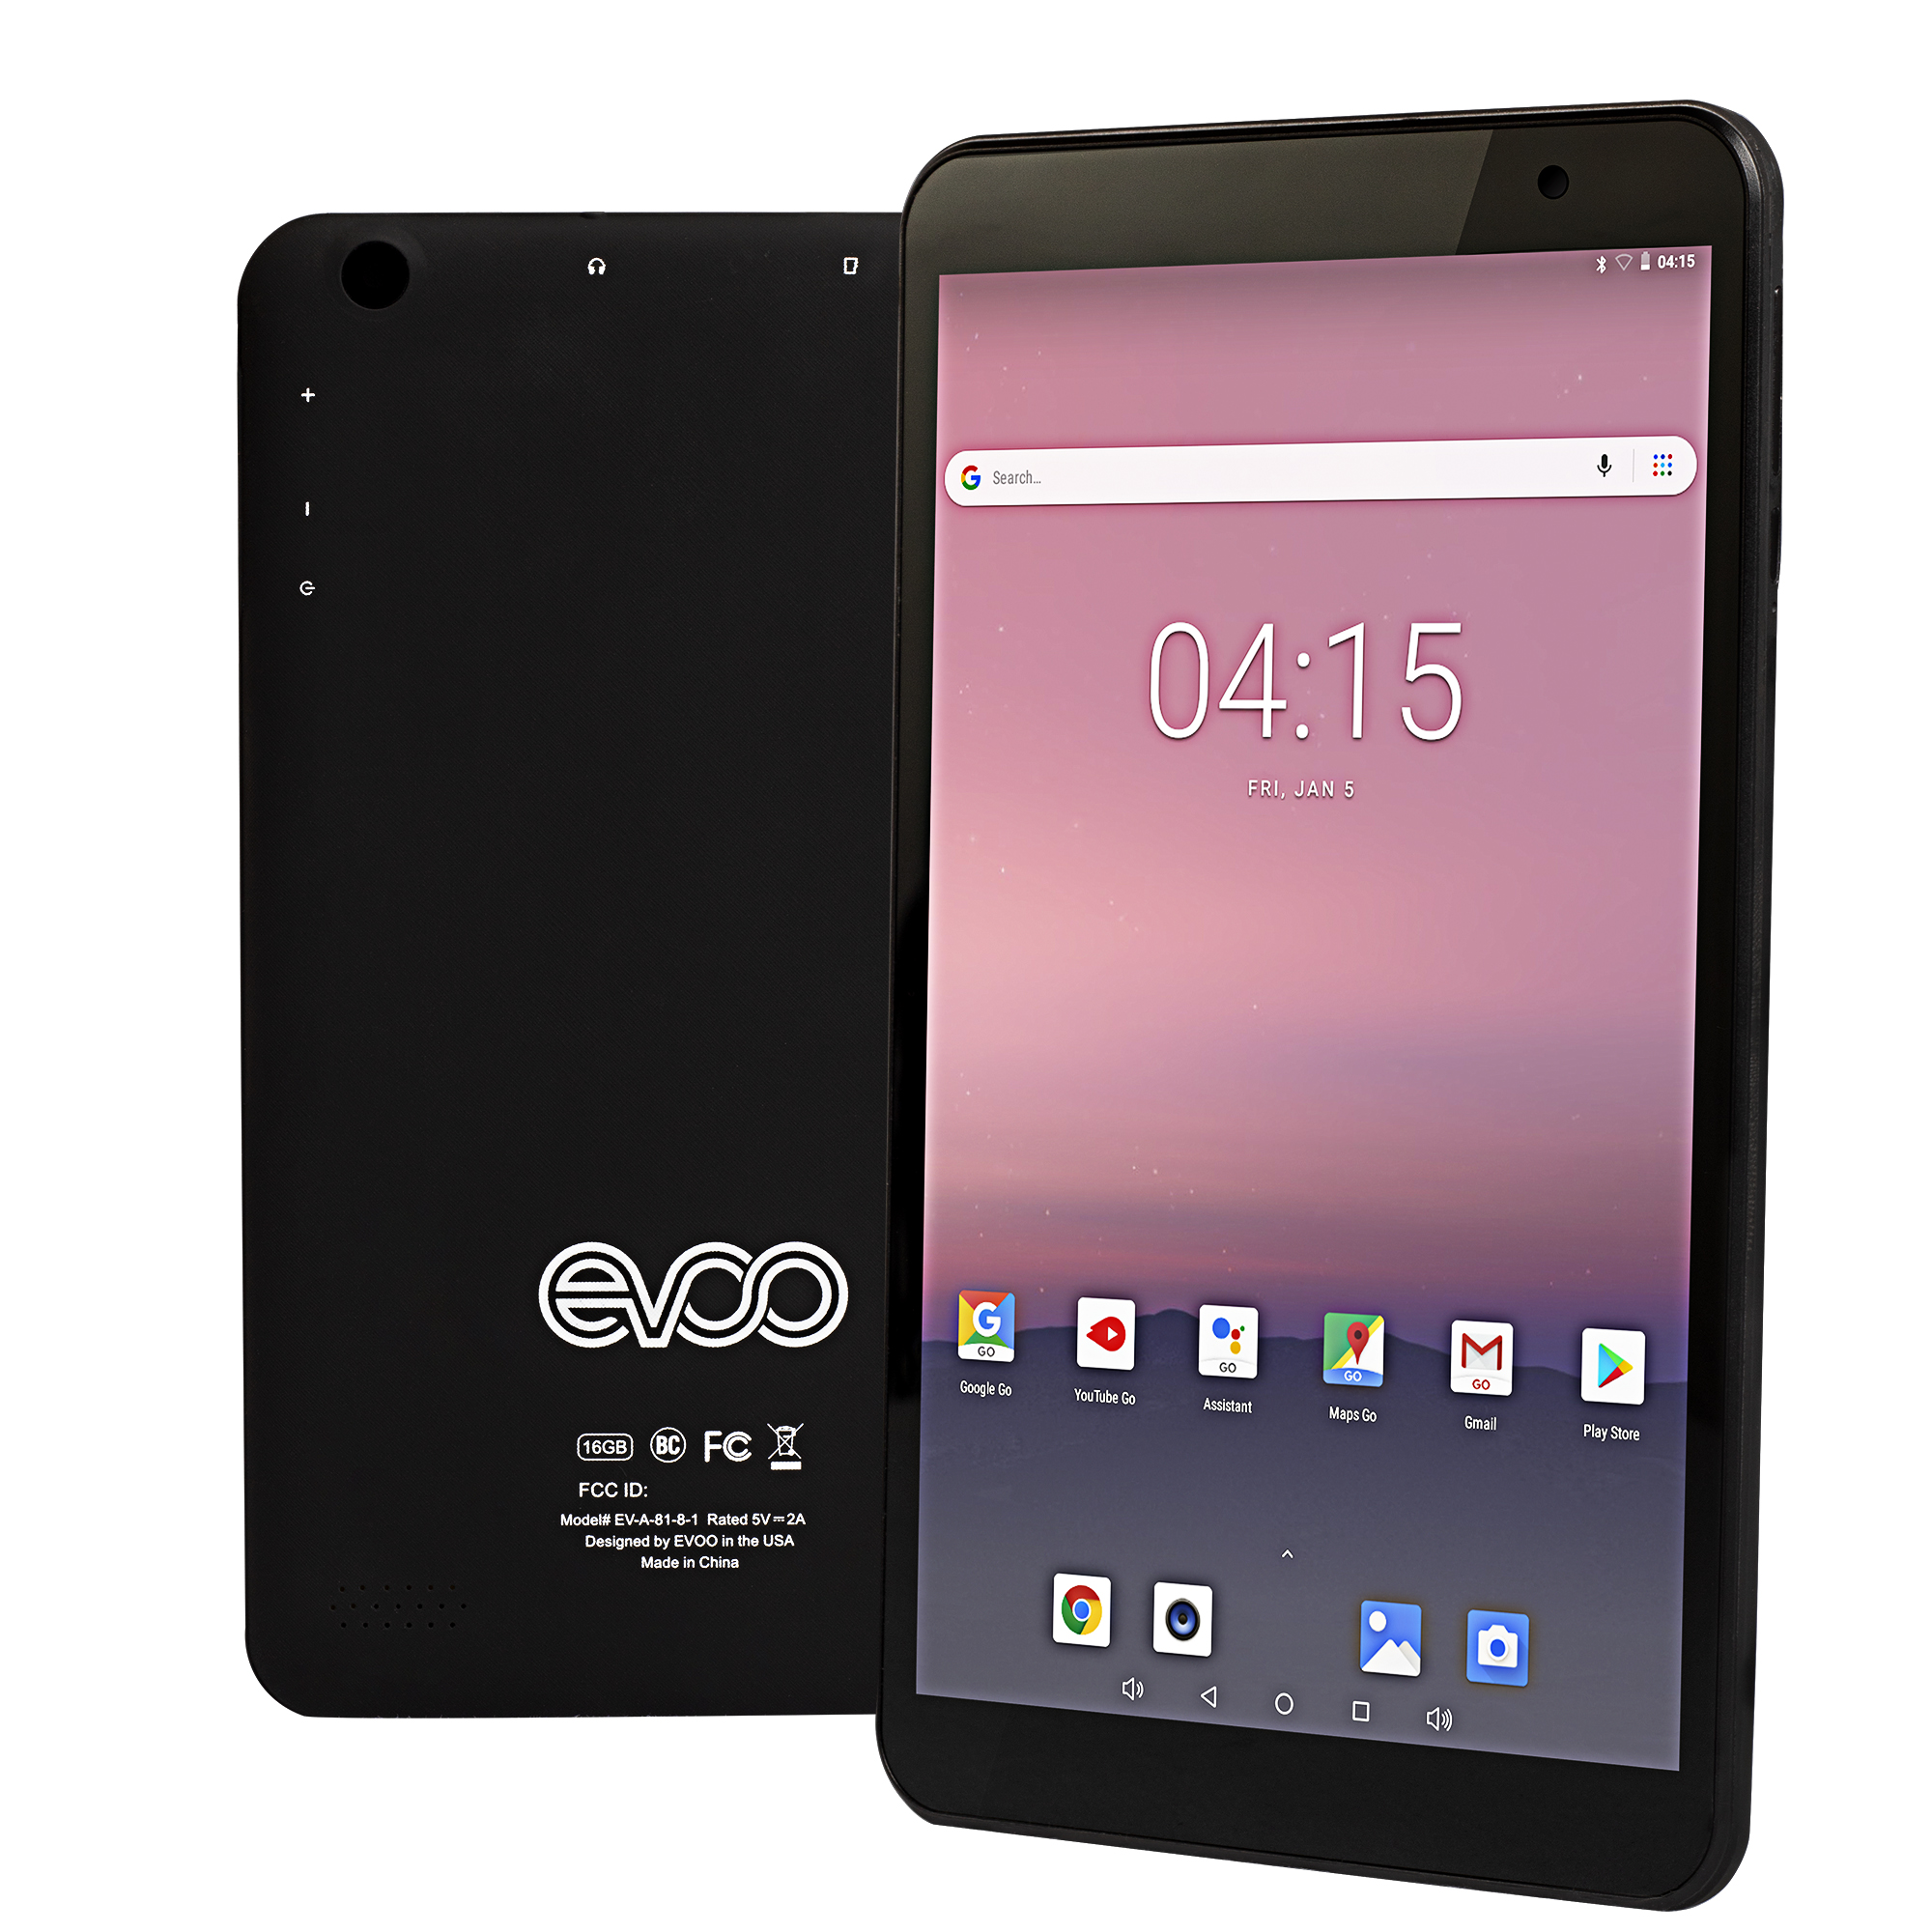 EVOO 8" Tablet, Android 8.1 Go Edition, Quad Core, 16GB Storage, Dual Cameras, Micro SD Slot, Black - image 3 of 4